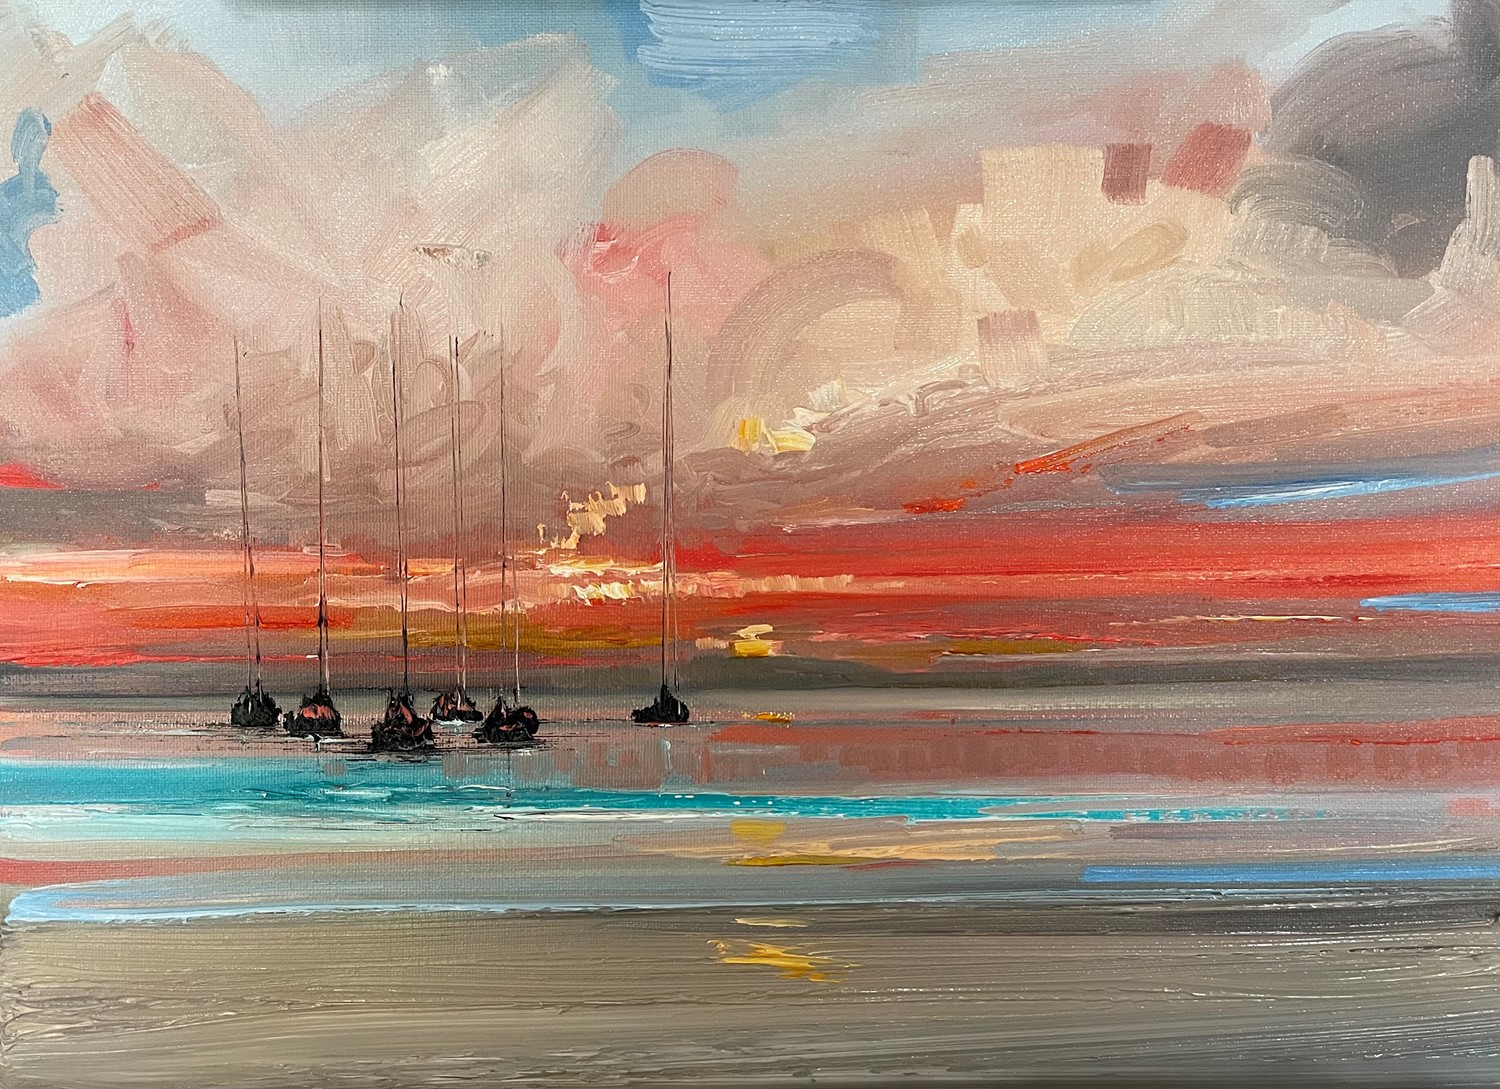 'Yachts against a fading sunset' by artist Rosanne Barr